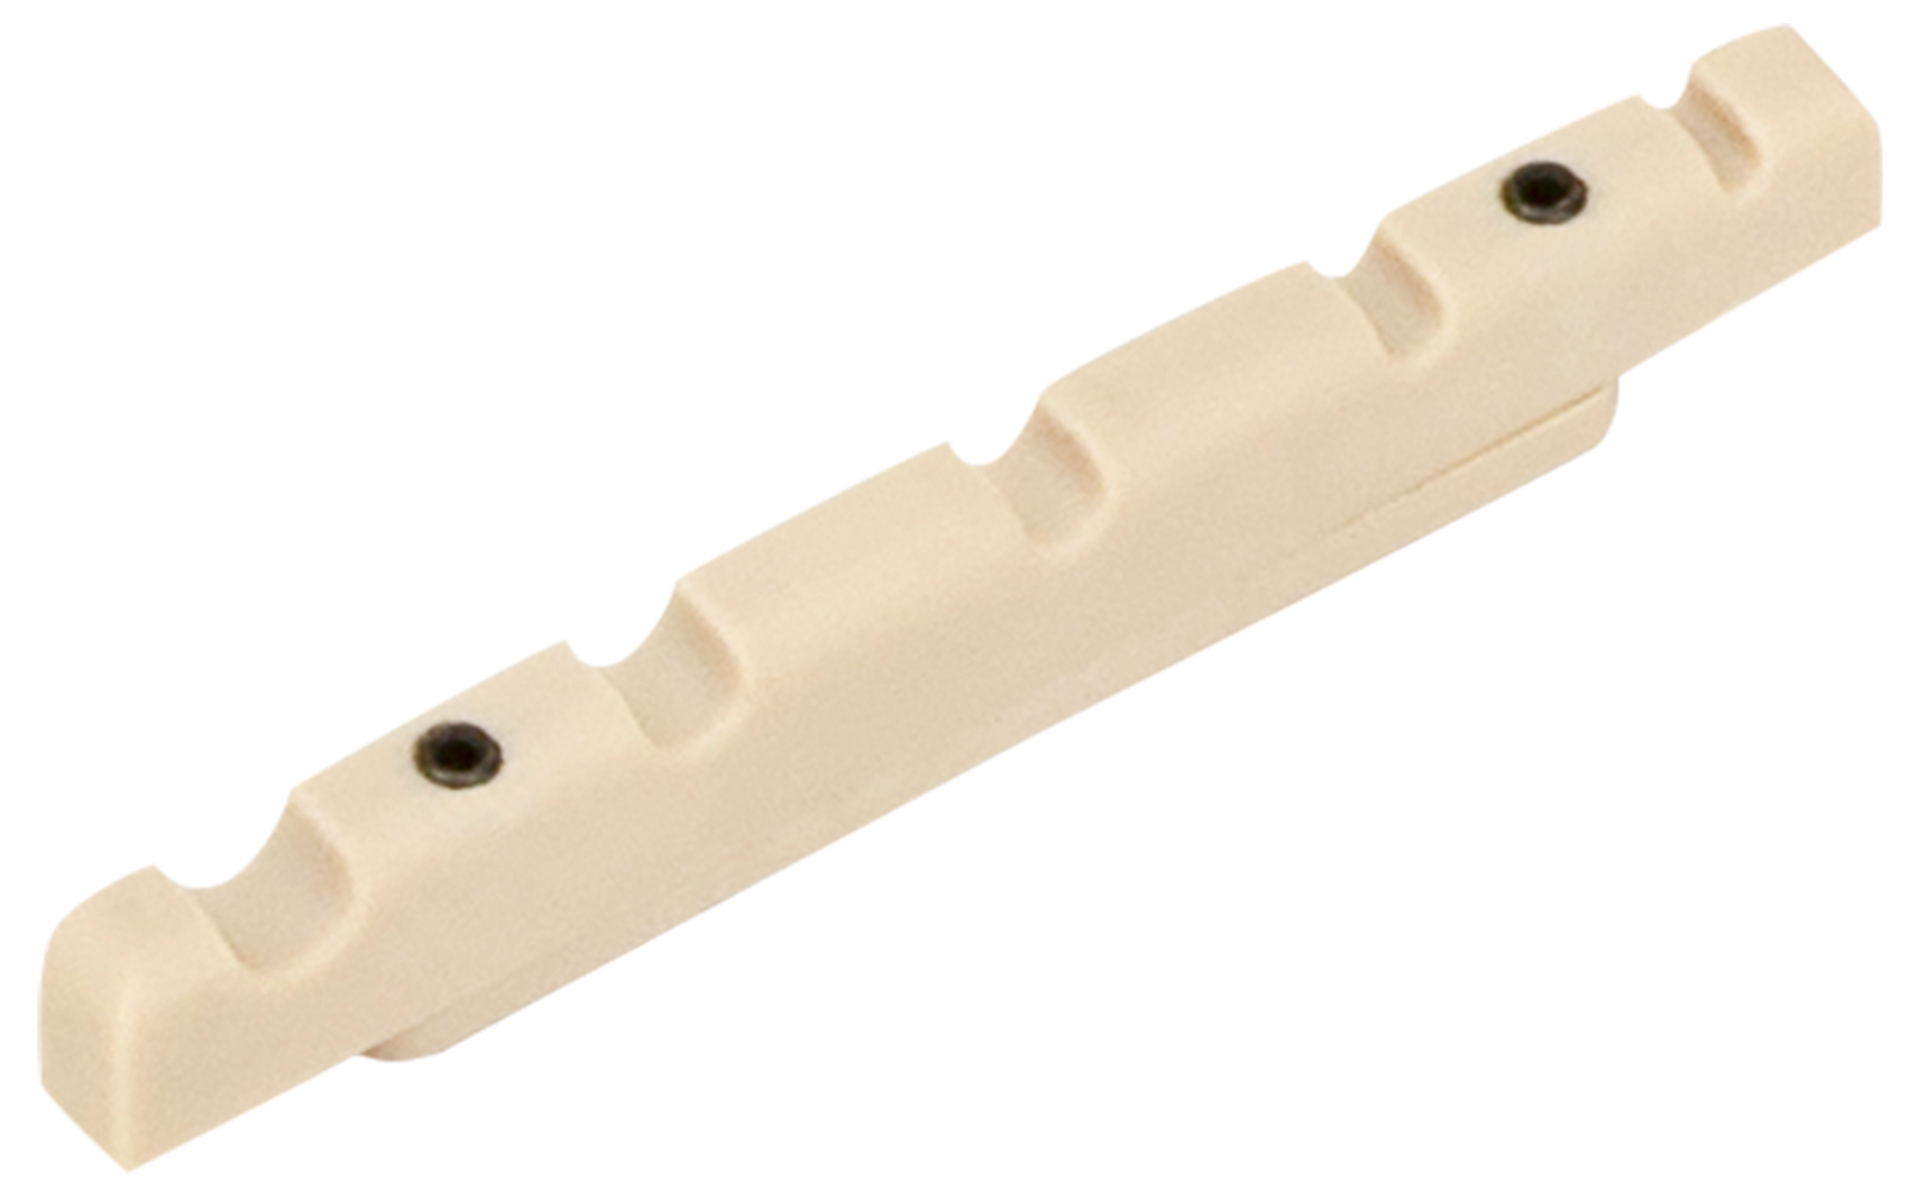 Sadowsky Parts - Just-A-Nut III - 5 String - 48.1 mm (1.875") Lefthand